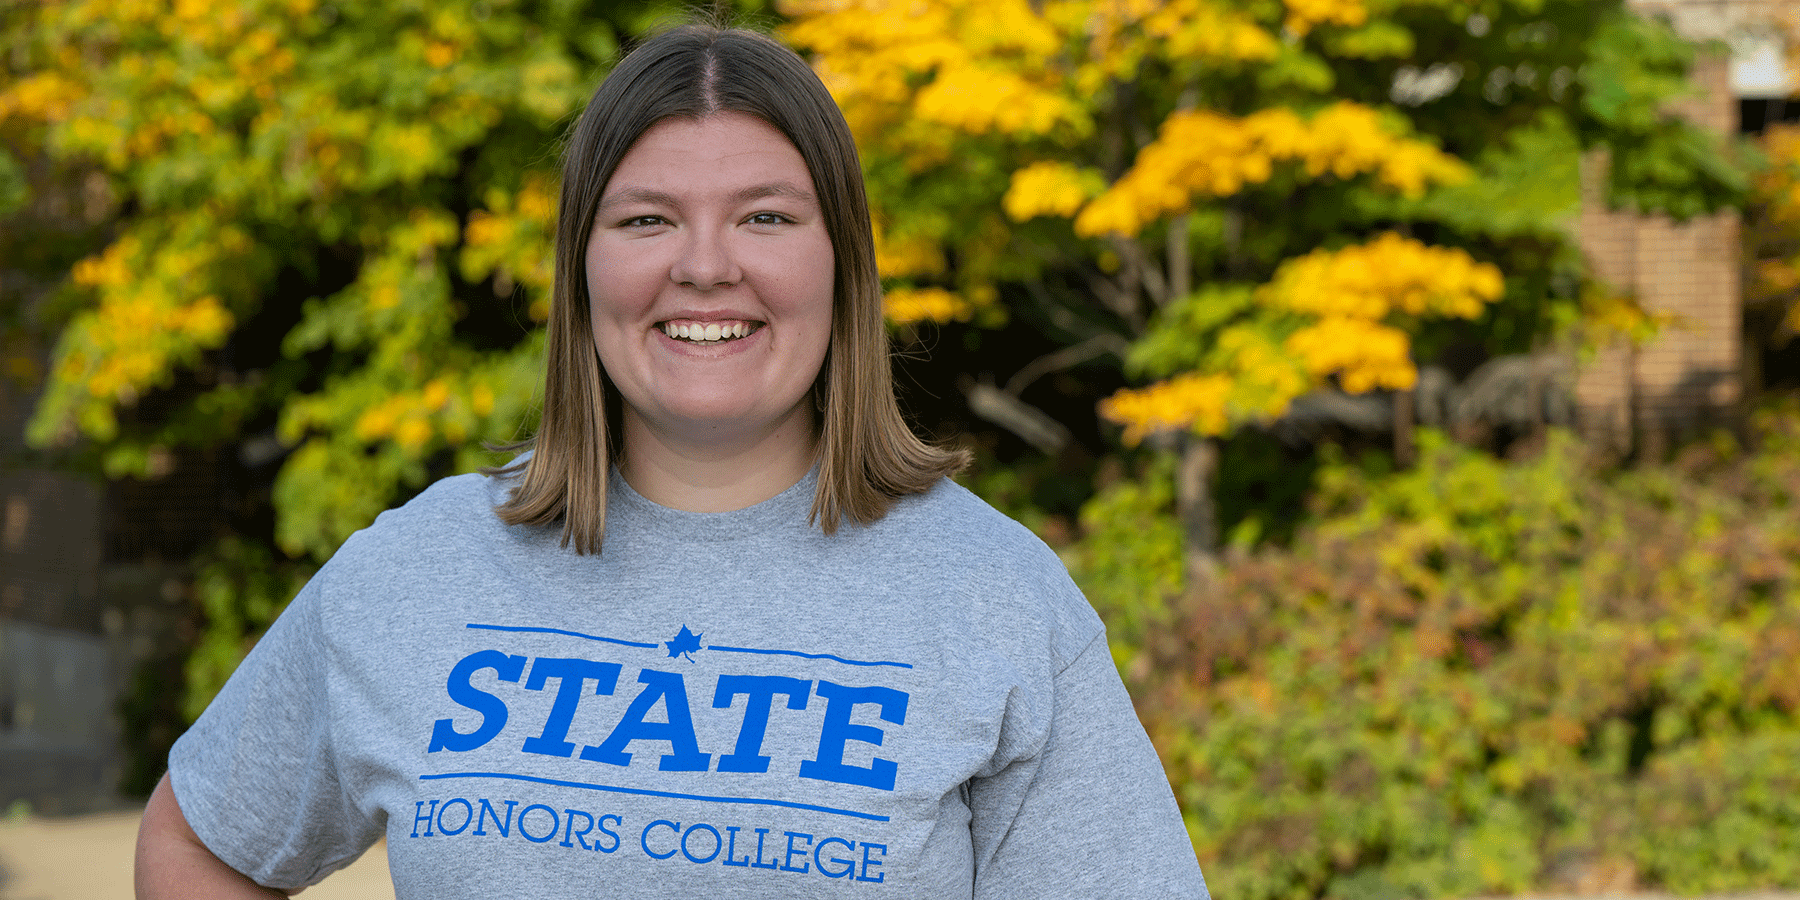 Honors student Kaylan Galey, smiling, with shoulder-length brown hair, is wearing a gray Indiana State Honors t-shirt. Trees with green and yellow leaves are visible in the background.